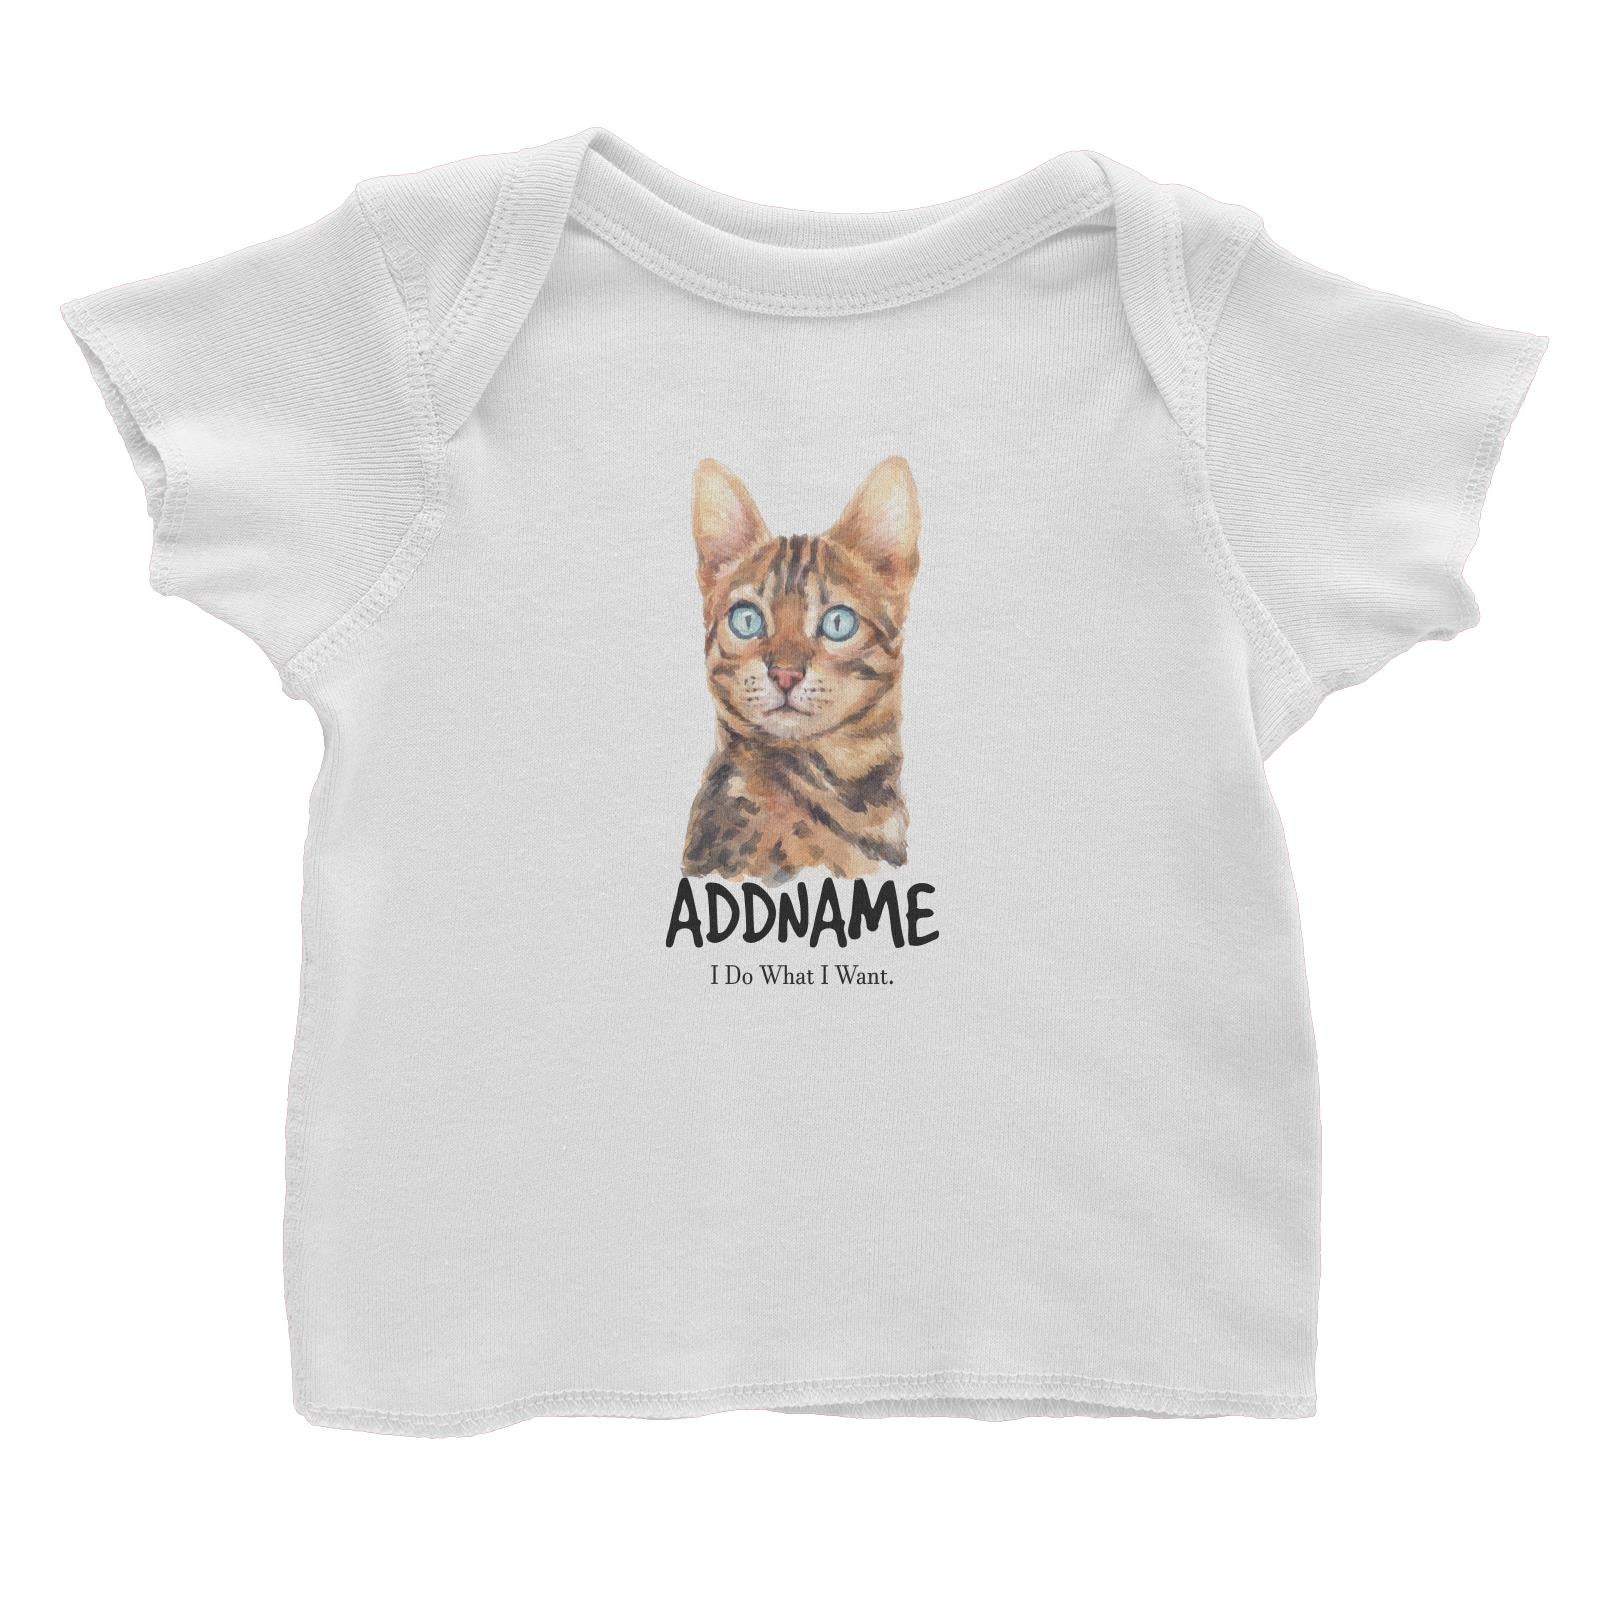 Watercolor Cat Bengal Cat I Do What I Want Addname Baby T-Shirt